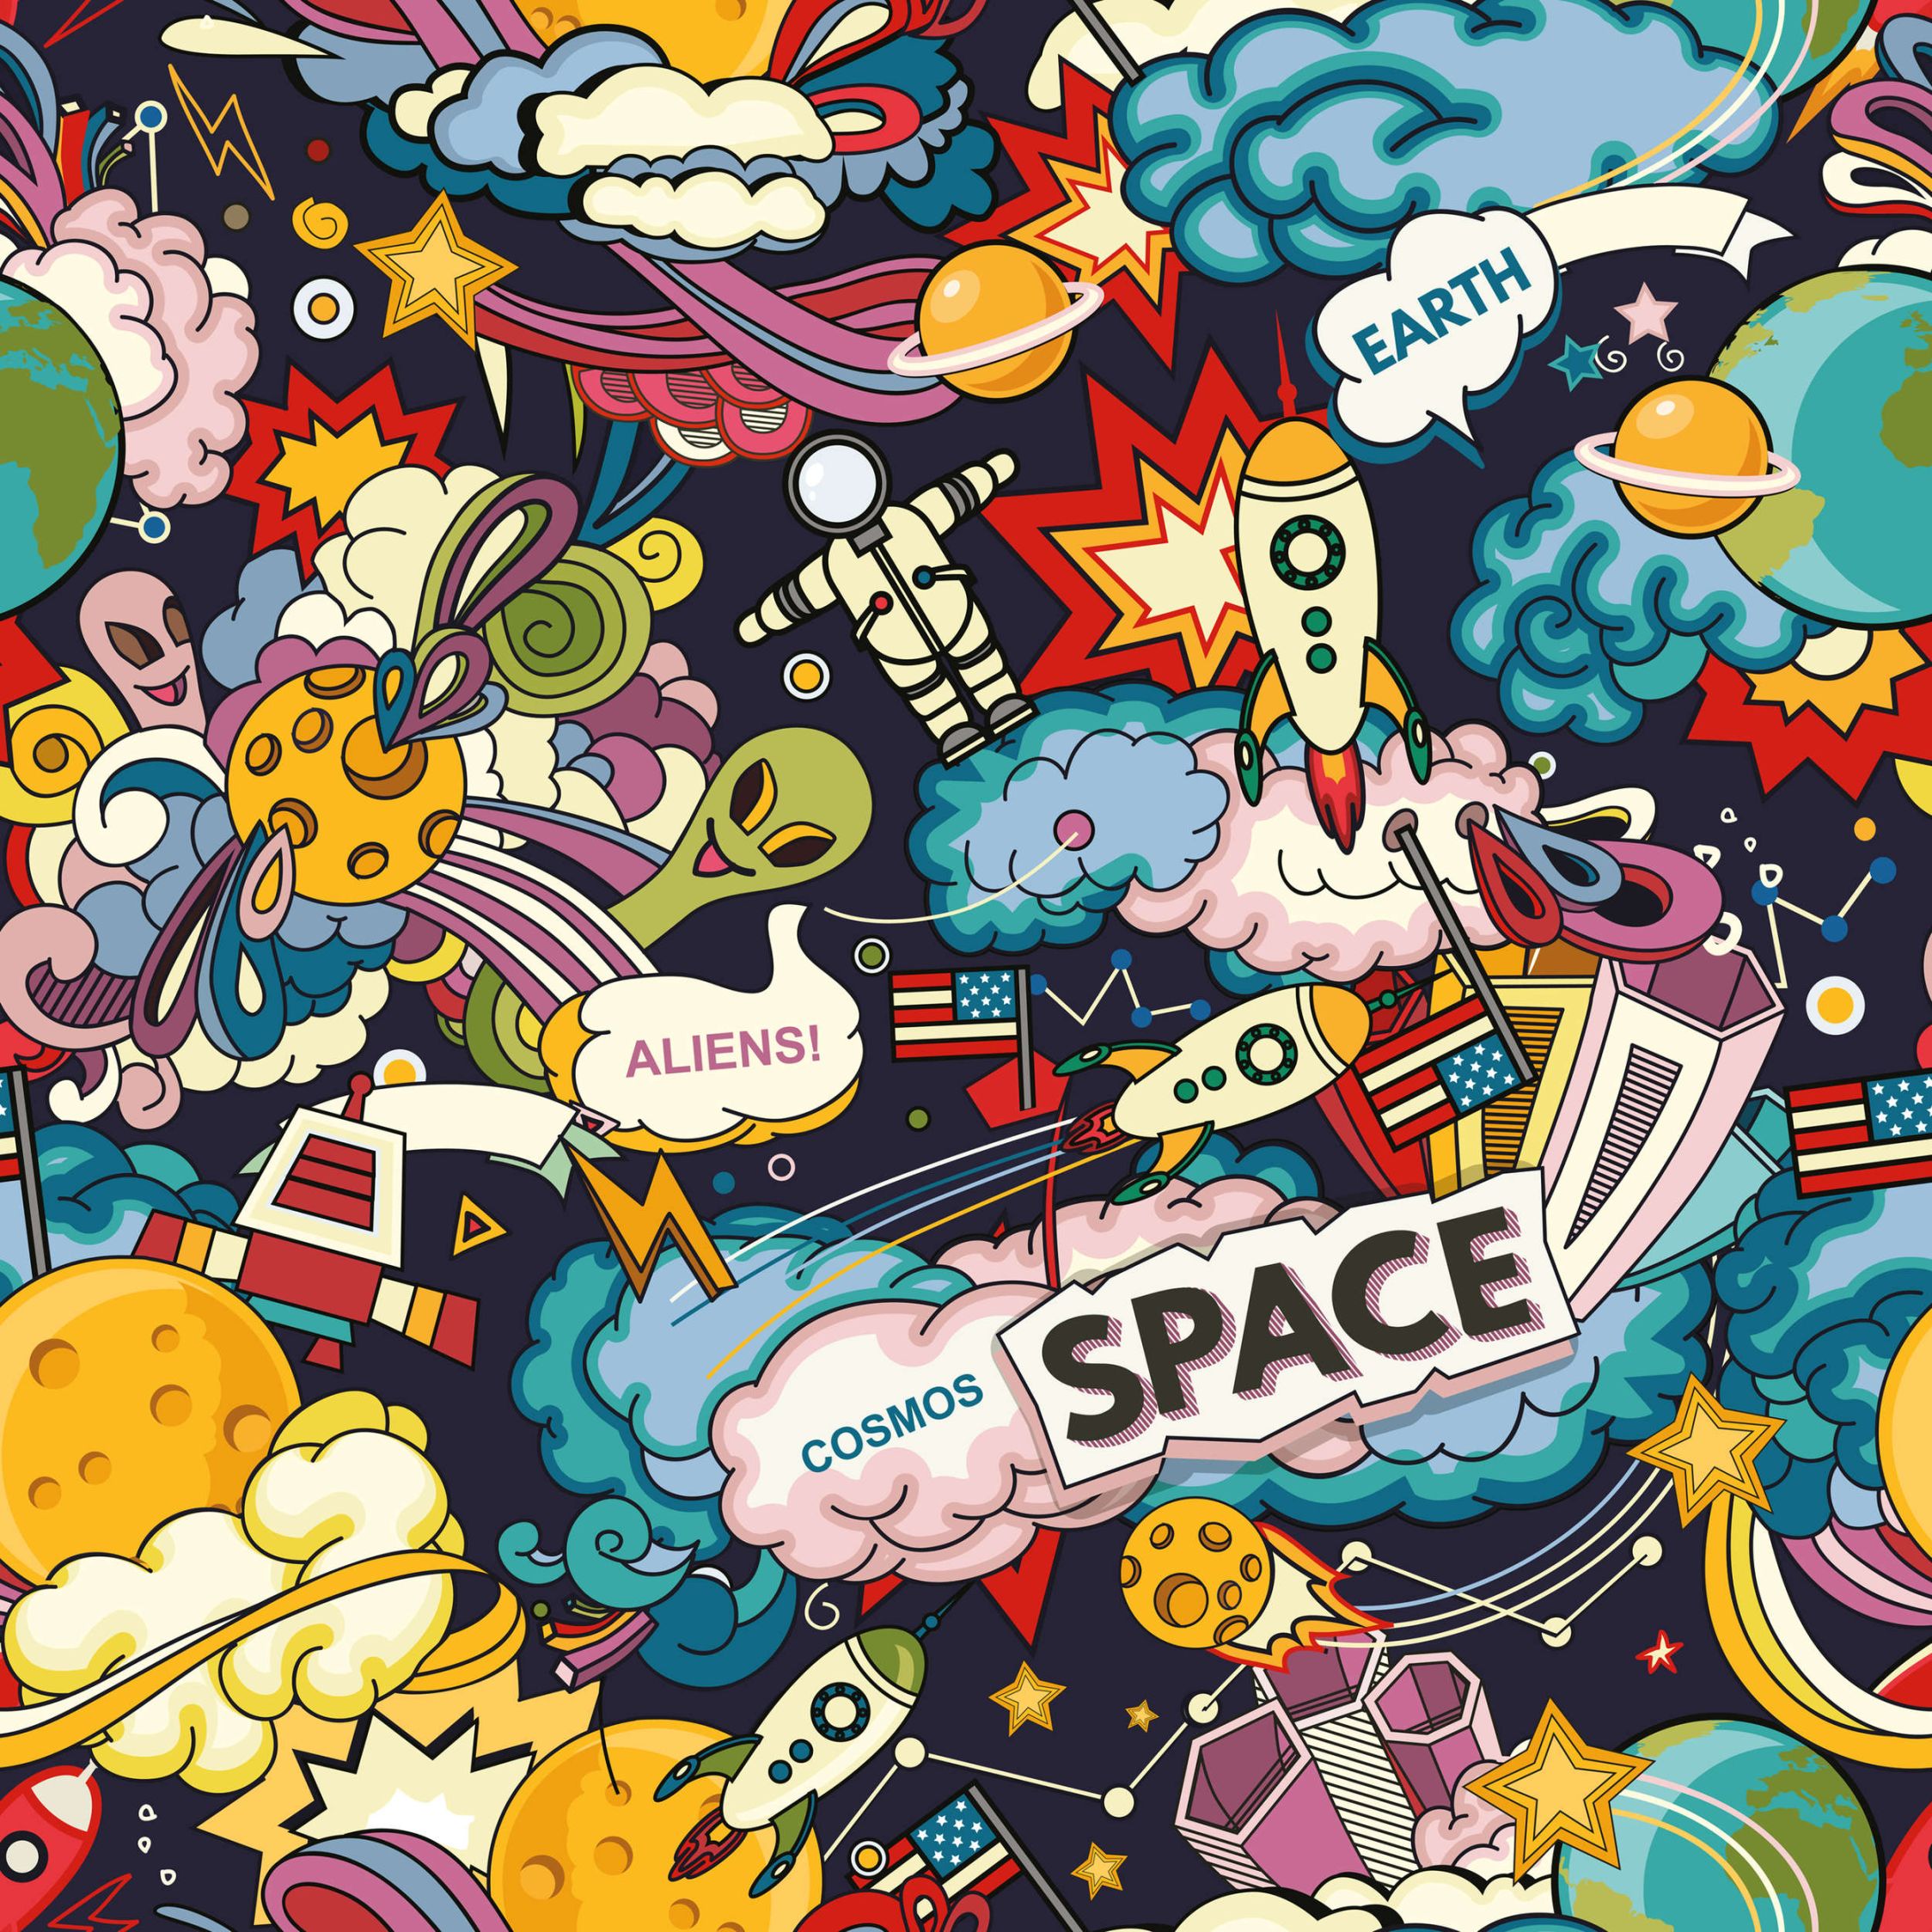             Photo wallpaper Universe collage in comic style - textured non-woven
        